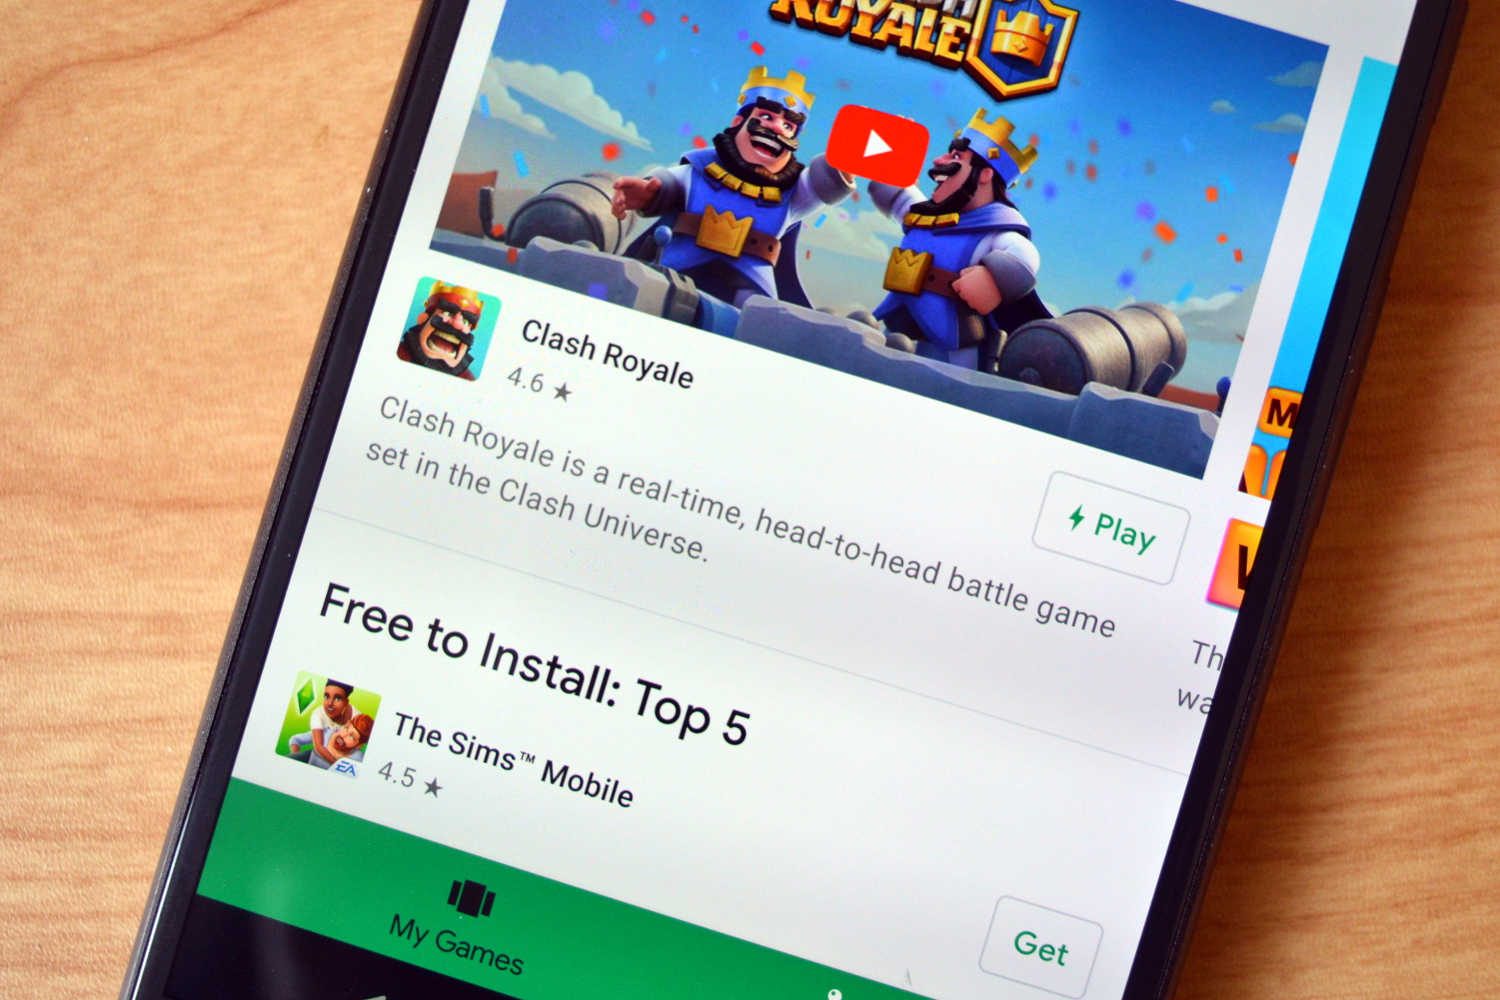 How to Play Offline Games on Google Play Store - Techtrickz